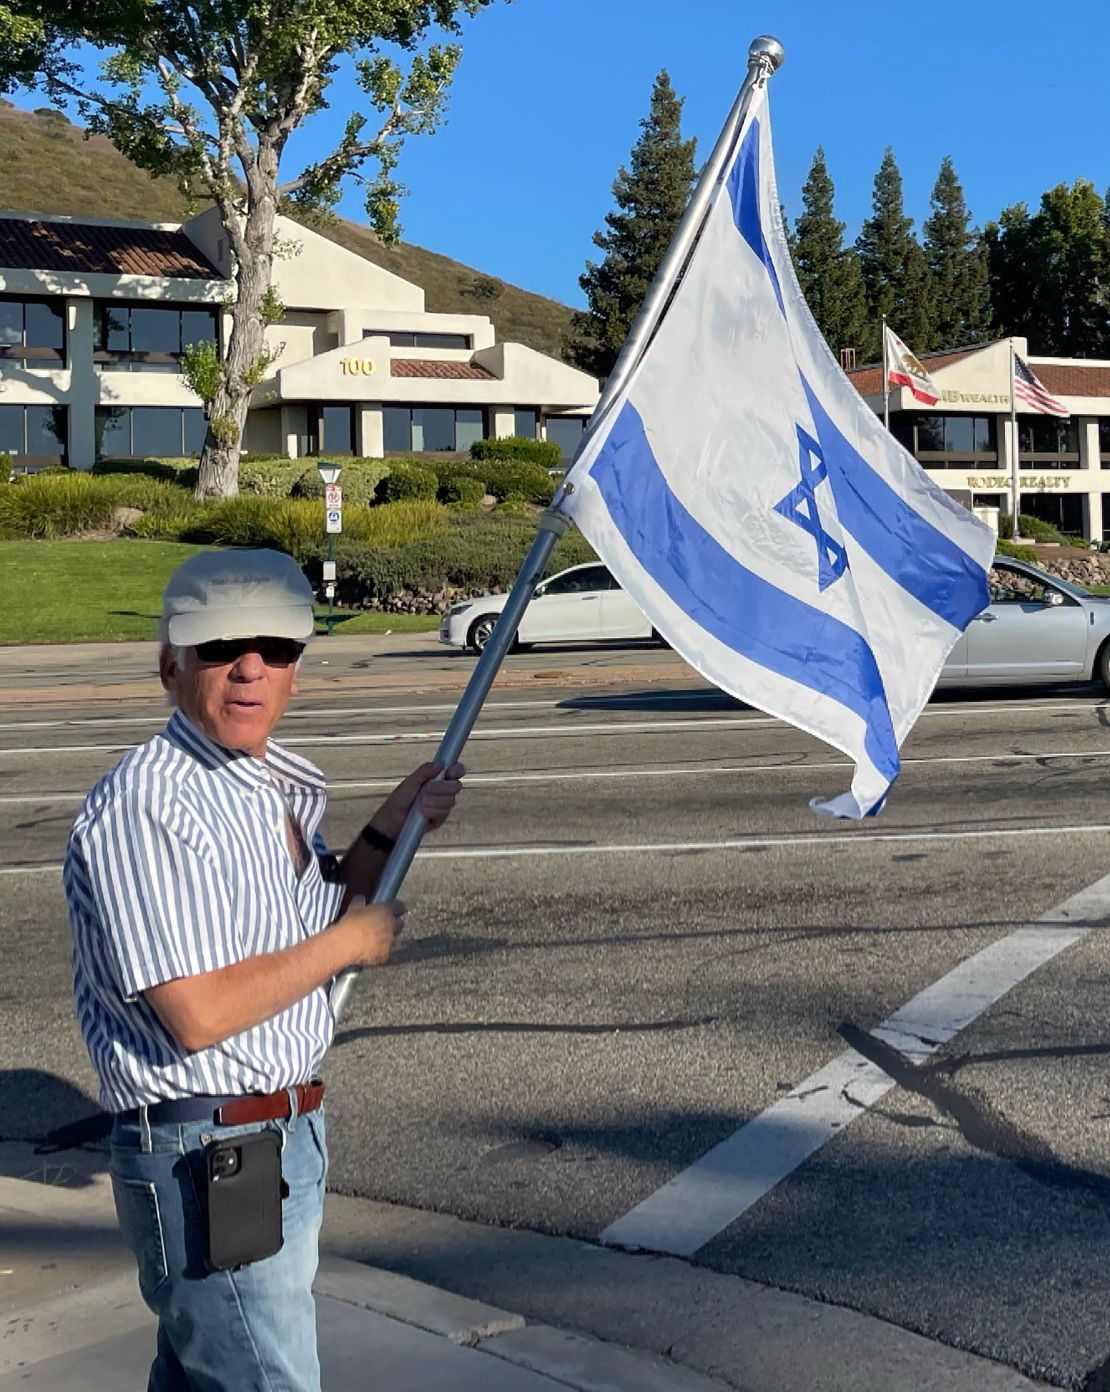 A 69-year-old man died after he suffered a head injury while he was at a pro-Palestine and pro-Israel demonstration, the Ventura County Sheriff's Office (VCSO) said in a news release Monday.  
 
Ventura County Sheriff's Office got multiple calls reporting a battery Sunday at approximately 3:20 pm PT during a demonstration in the City of Thousand Oaks, they said.  
 
When deputies arrived, they said they found Paul Kessler suffering from a head injury, which witnesses said occurred during a physical altercation with at least one counter-protester where he fell backwards and struck his head on the ground. Kessler was taken to a local hospital for treatment but ultimately died Monday, VCSO said.